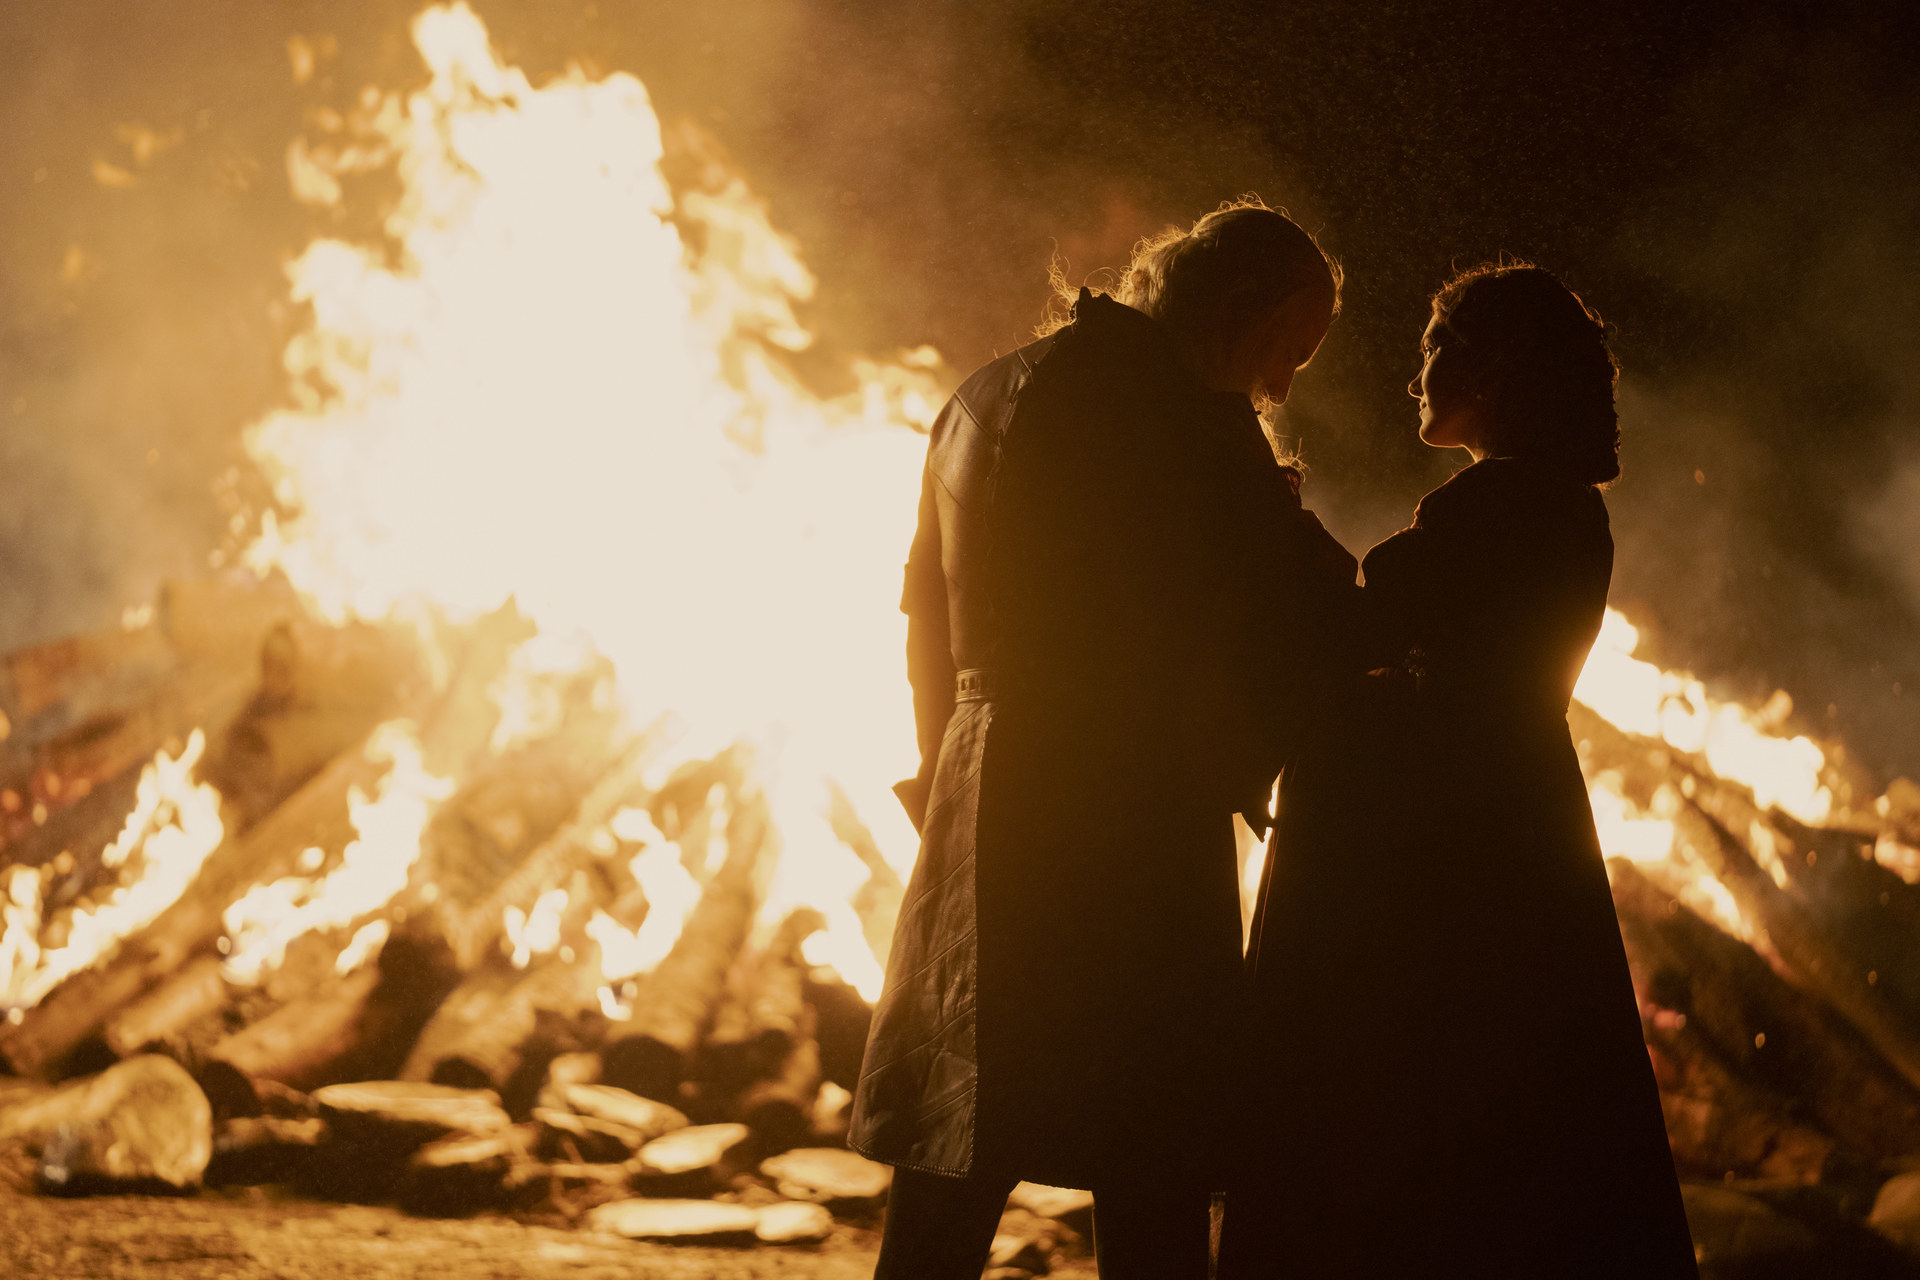 Viserys and Alicent stand in front of a bonfire